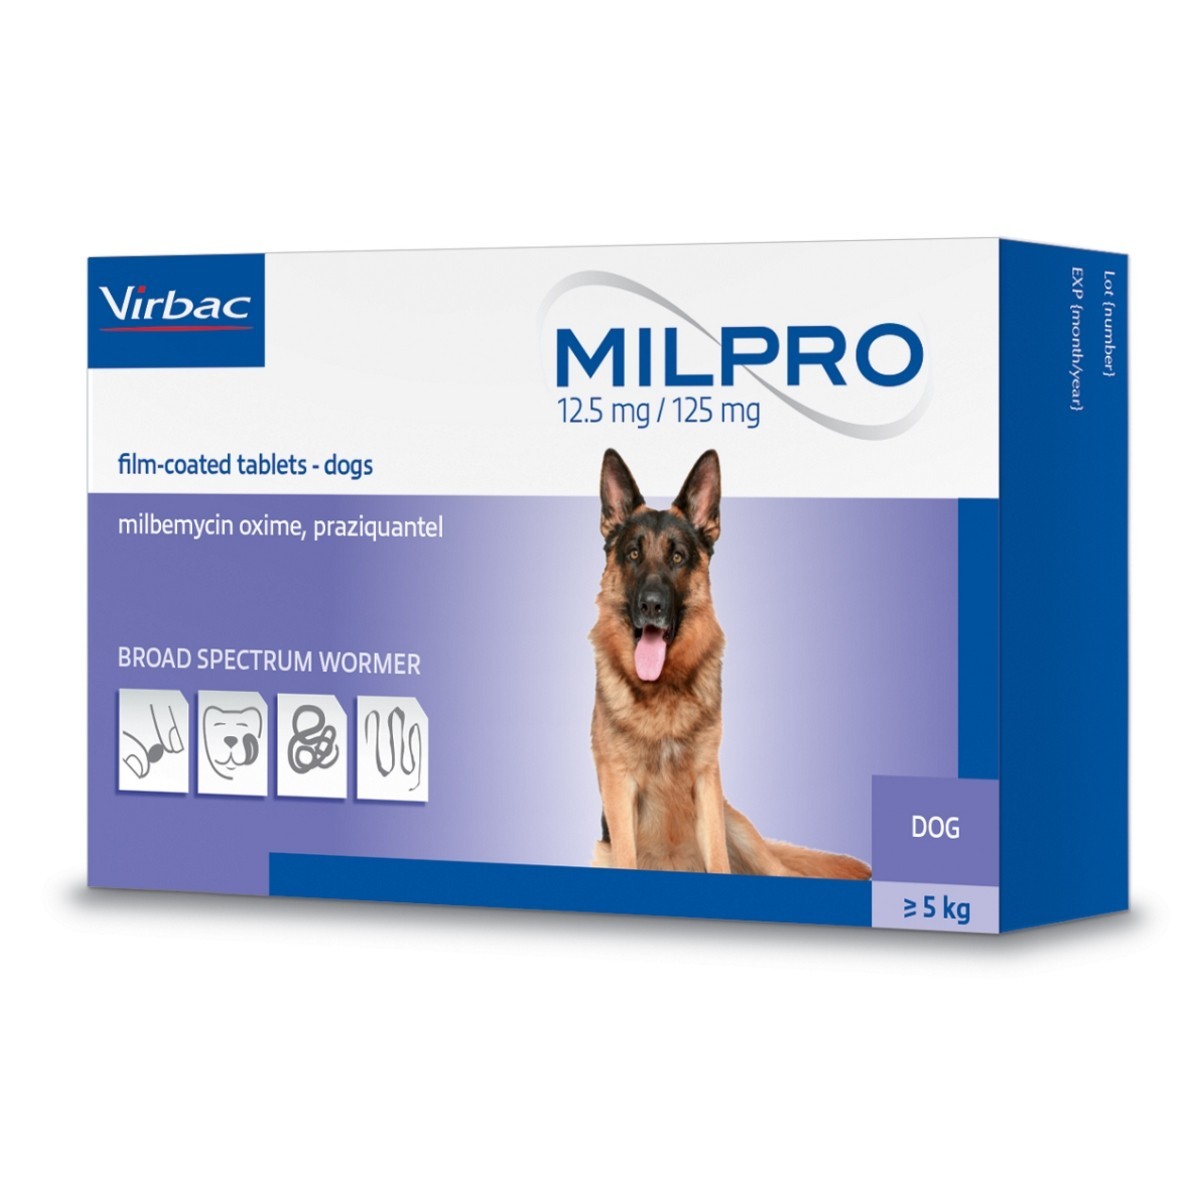 Milpro 12.5mg/125mg Worming Tablets for 